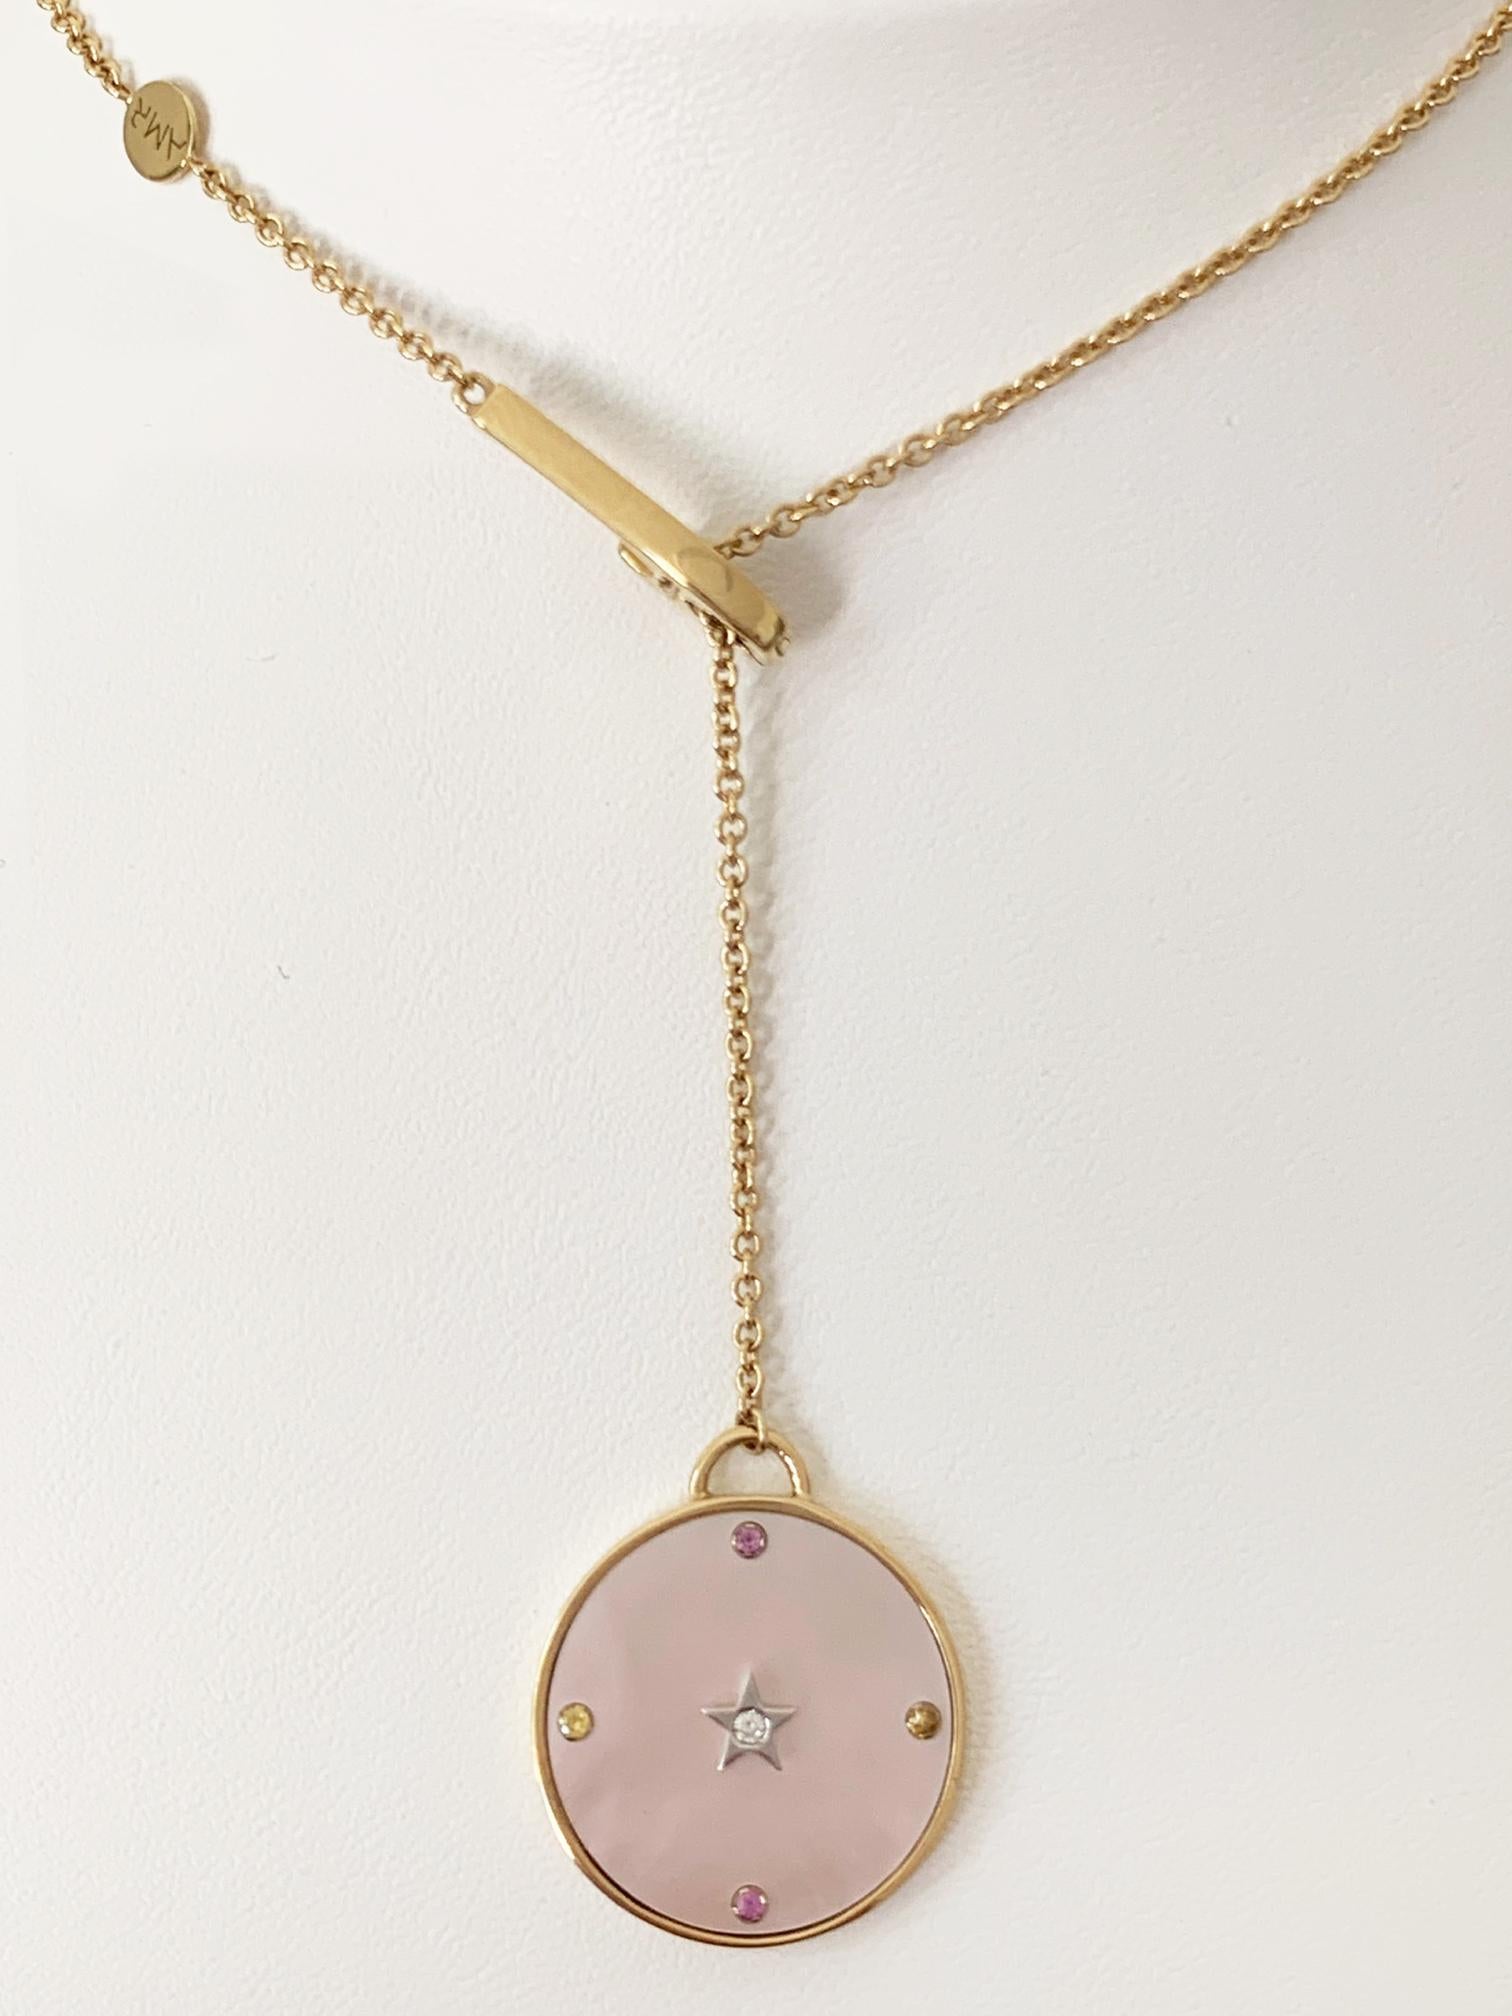 Contemporary 18 Karat Yellow Gold, Pale Pink Mother of Pearl, Diamonds, Sapphires, Pendant For Sale